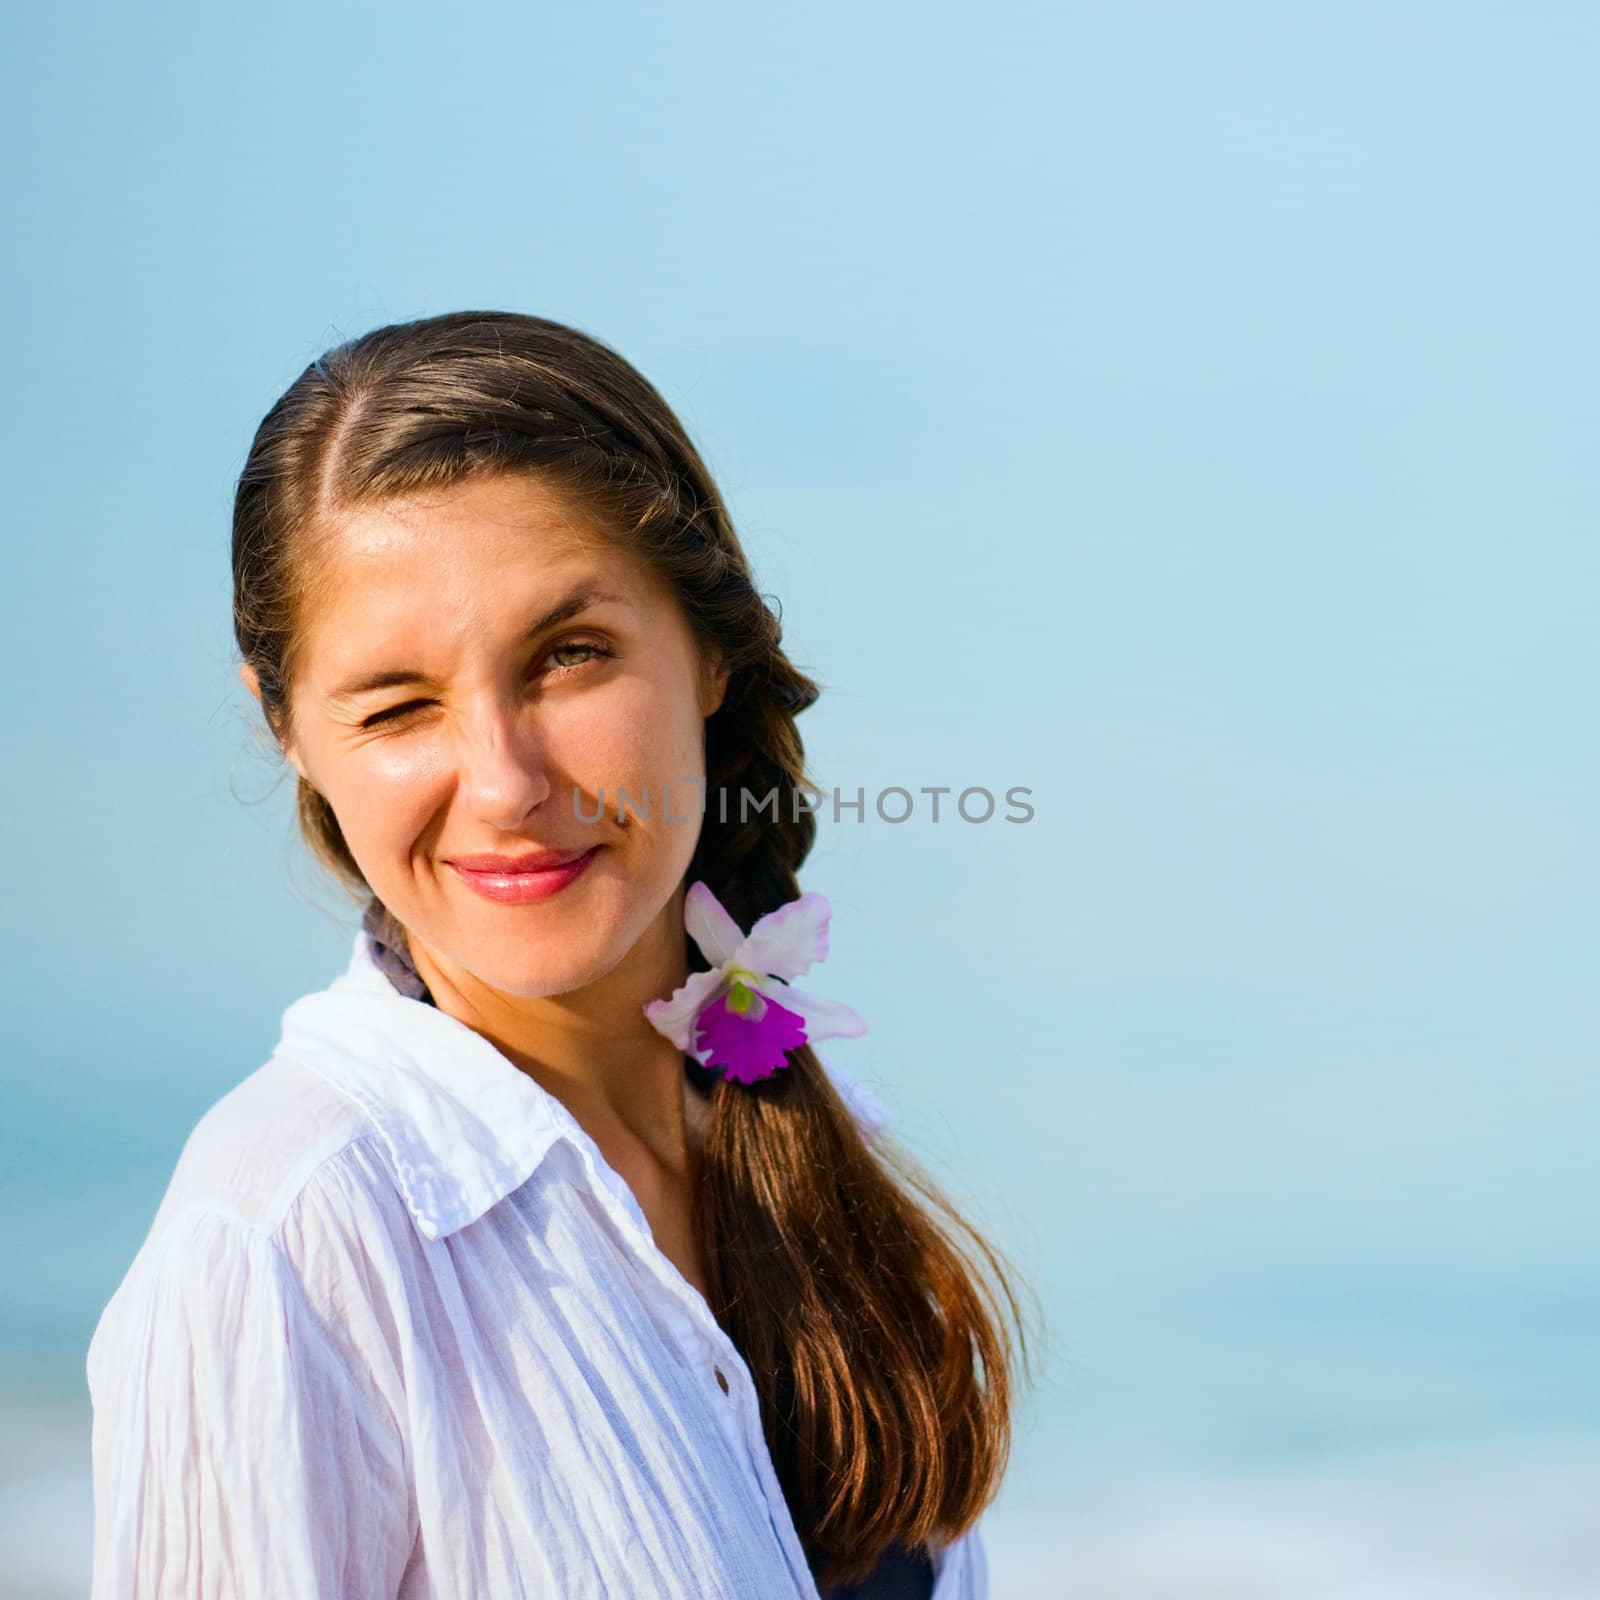 Portrait of young winking woman on the sky background